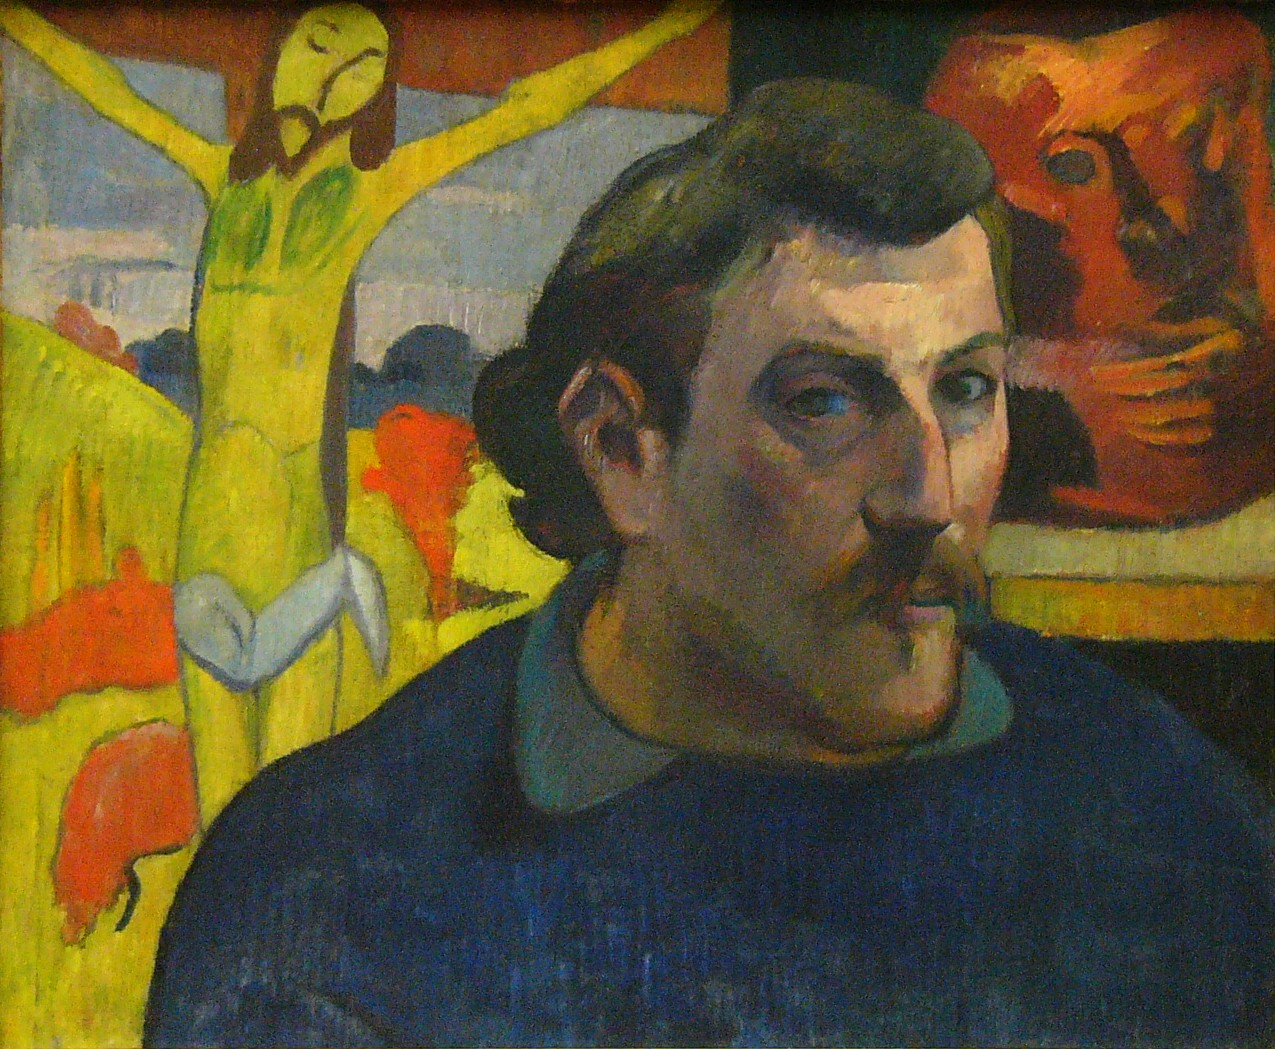 Di Paul Gauguin - Photography and original upload by Rv at fr.wikipedia, Pubblico dominio, https://commons.wikimedia.org/w/index.php?curid=2694787